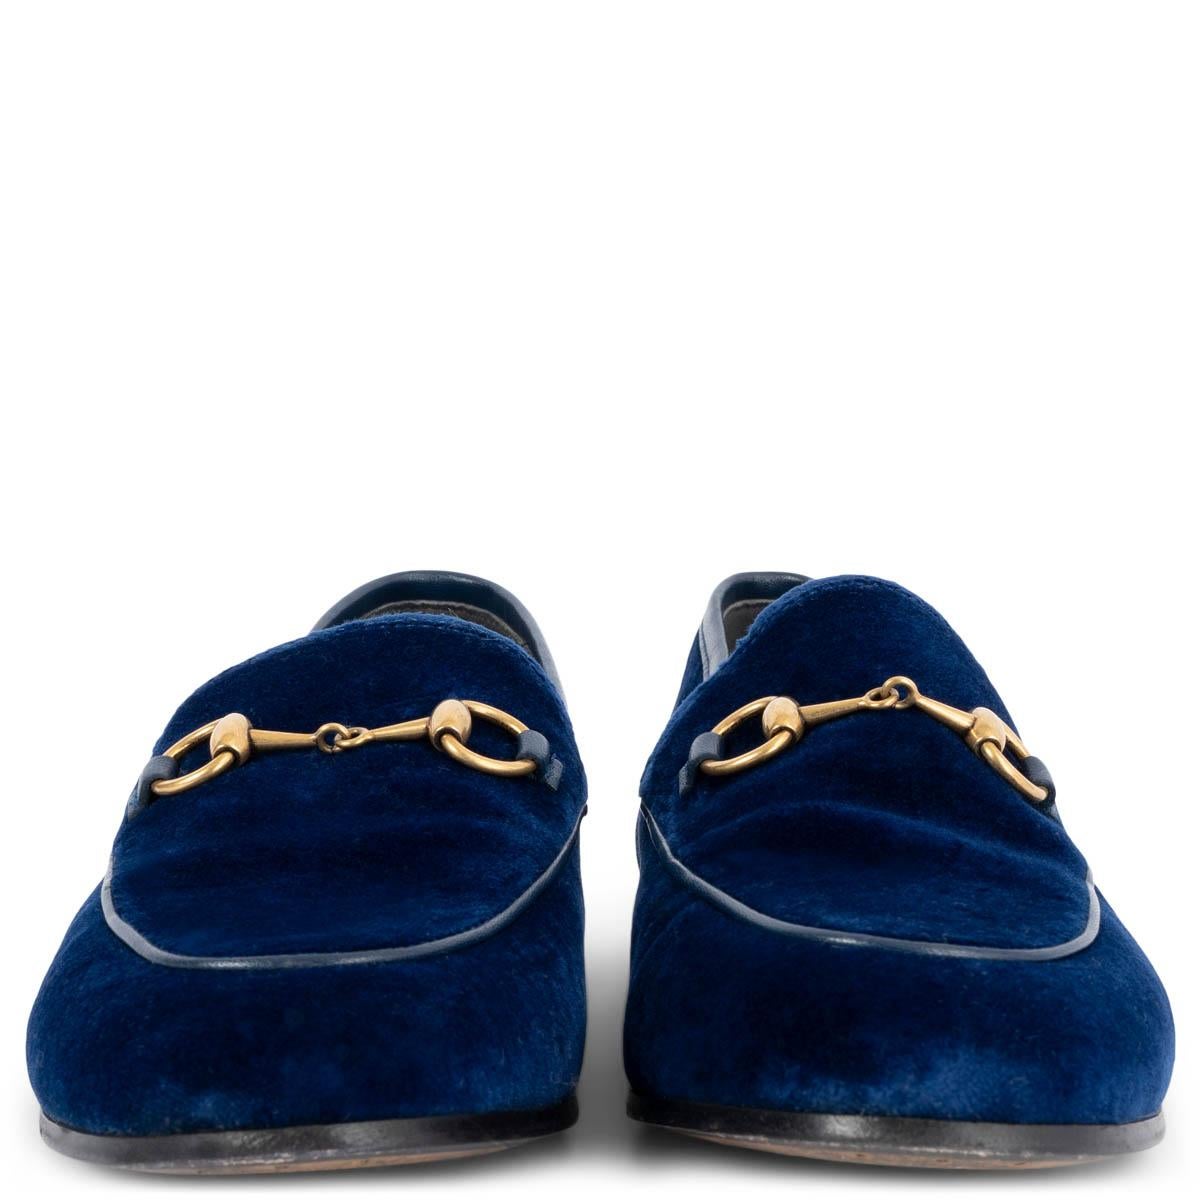 100% authentic Gucci Jordaan Horsebit loafers in blue velvet with navy blue leather trim. Have been worn and are in excellent condition. 

Measurements
Imprinted Size	37.5
Shoe Size	37.5
Inside Sole	24.5cm (9.6in)
Width	7.5cm (2.9in)
Heel	1.5cm